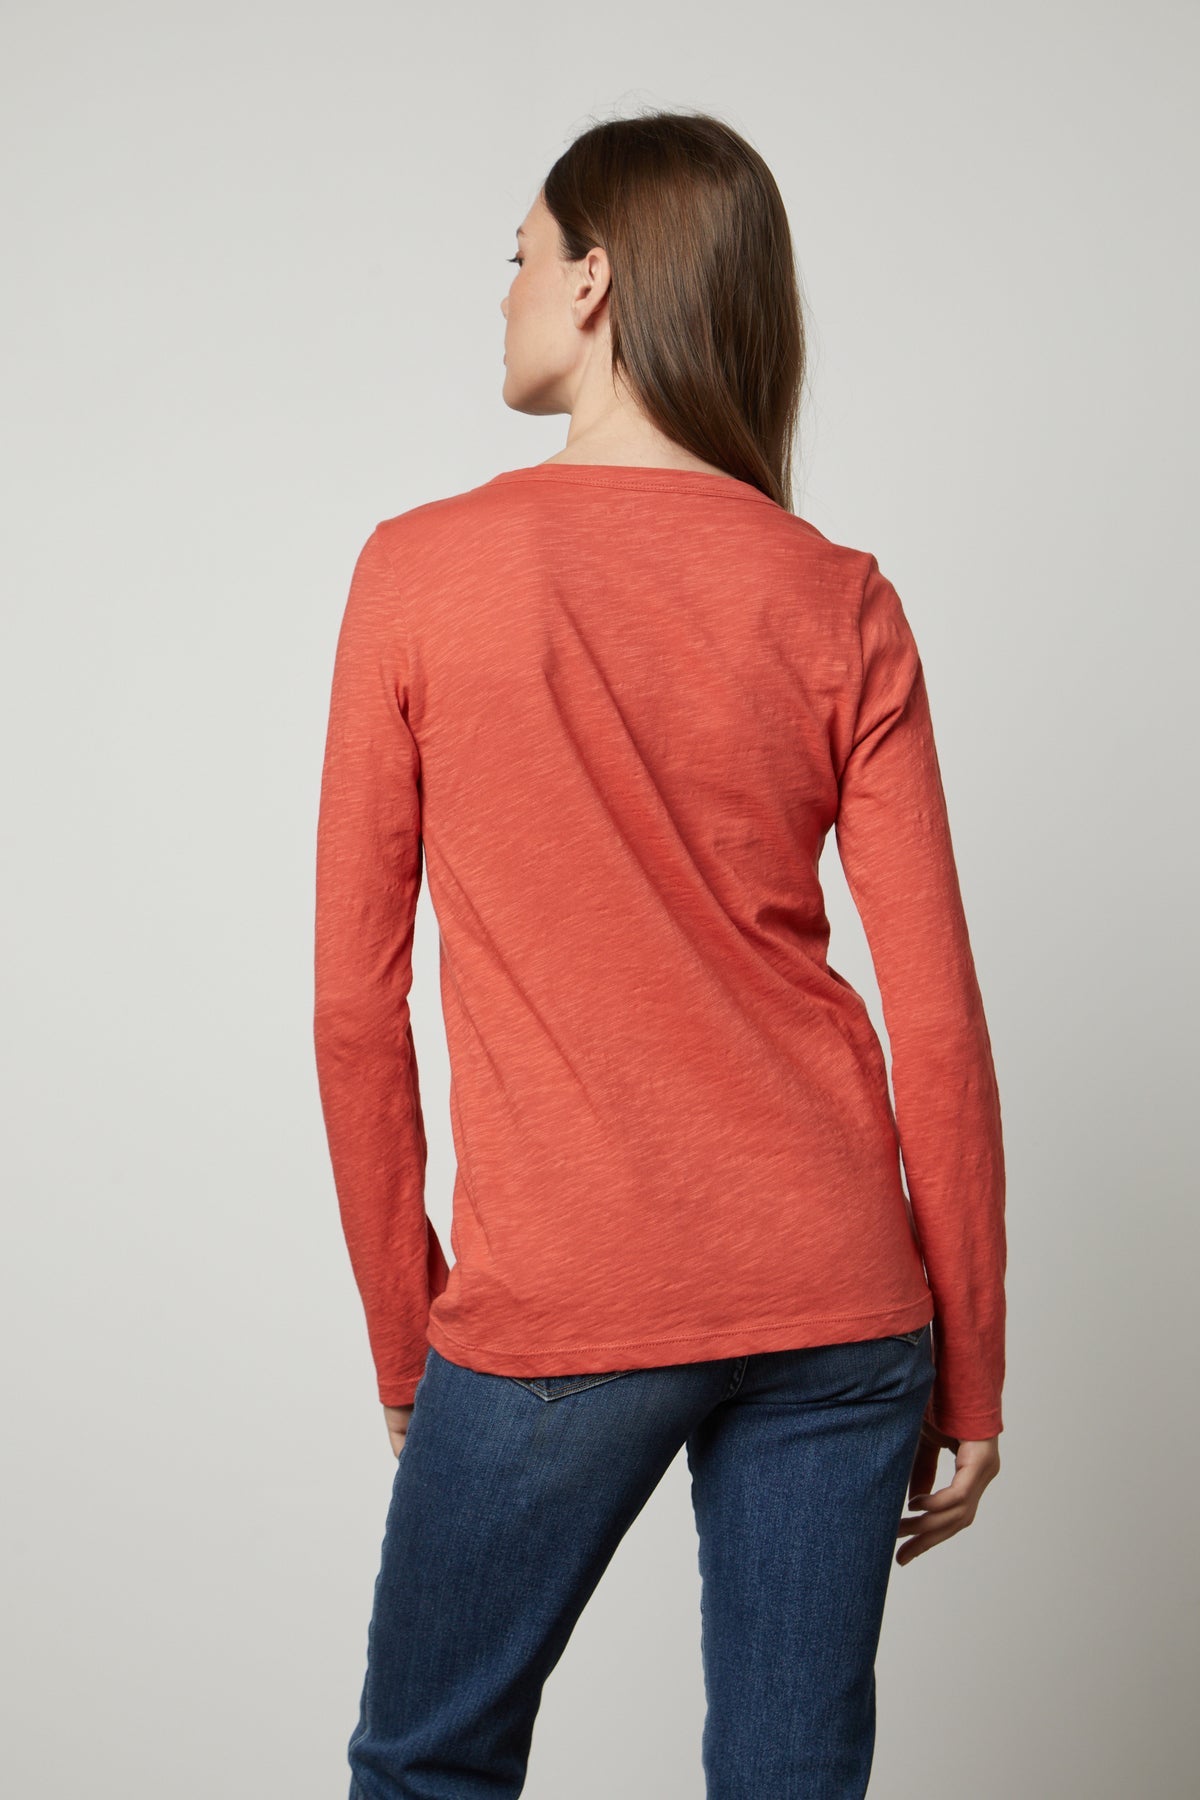 The back view of a woman wearing an orange LIZZIE ORIGINAL SLUB LONG SLEEVE TEE made by Velvet by Graham & Spencer.-35782988202177